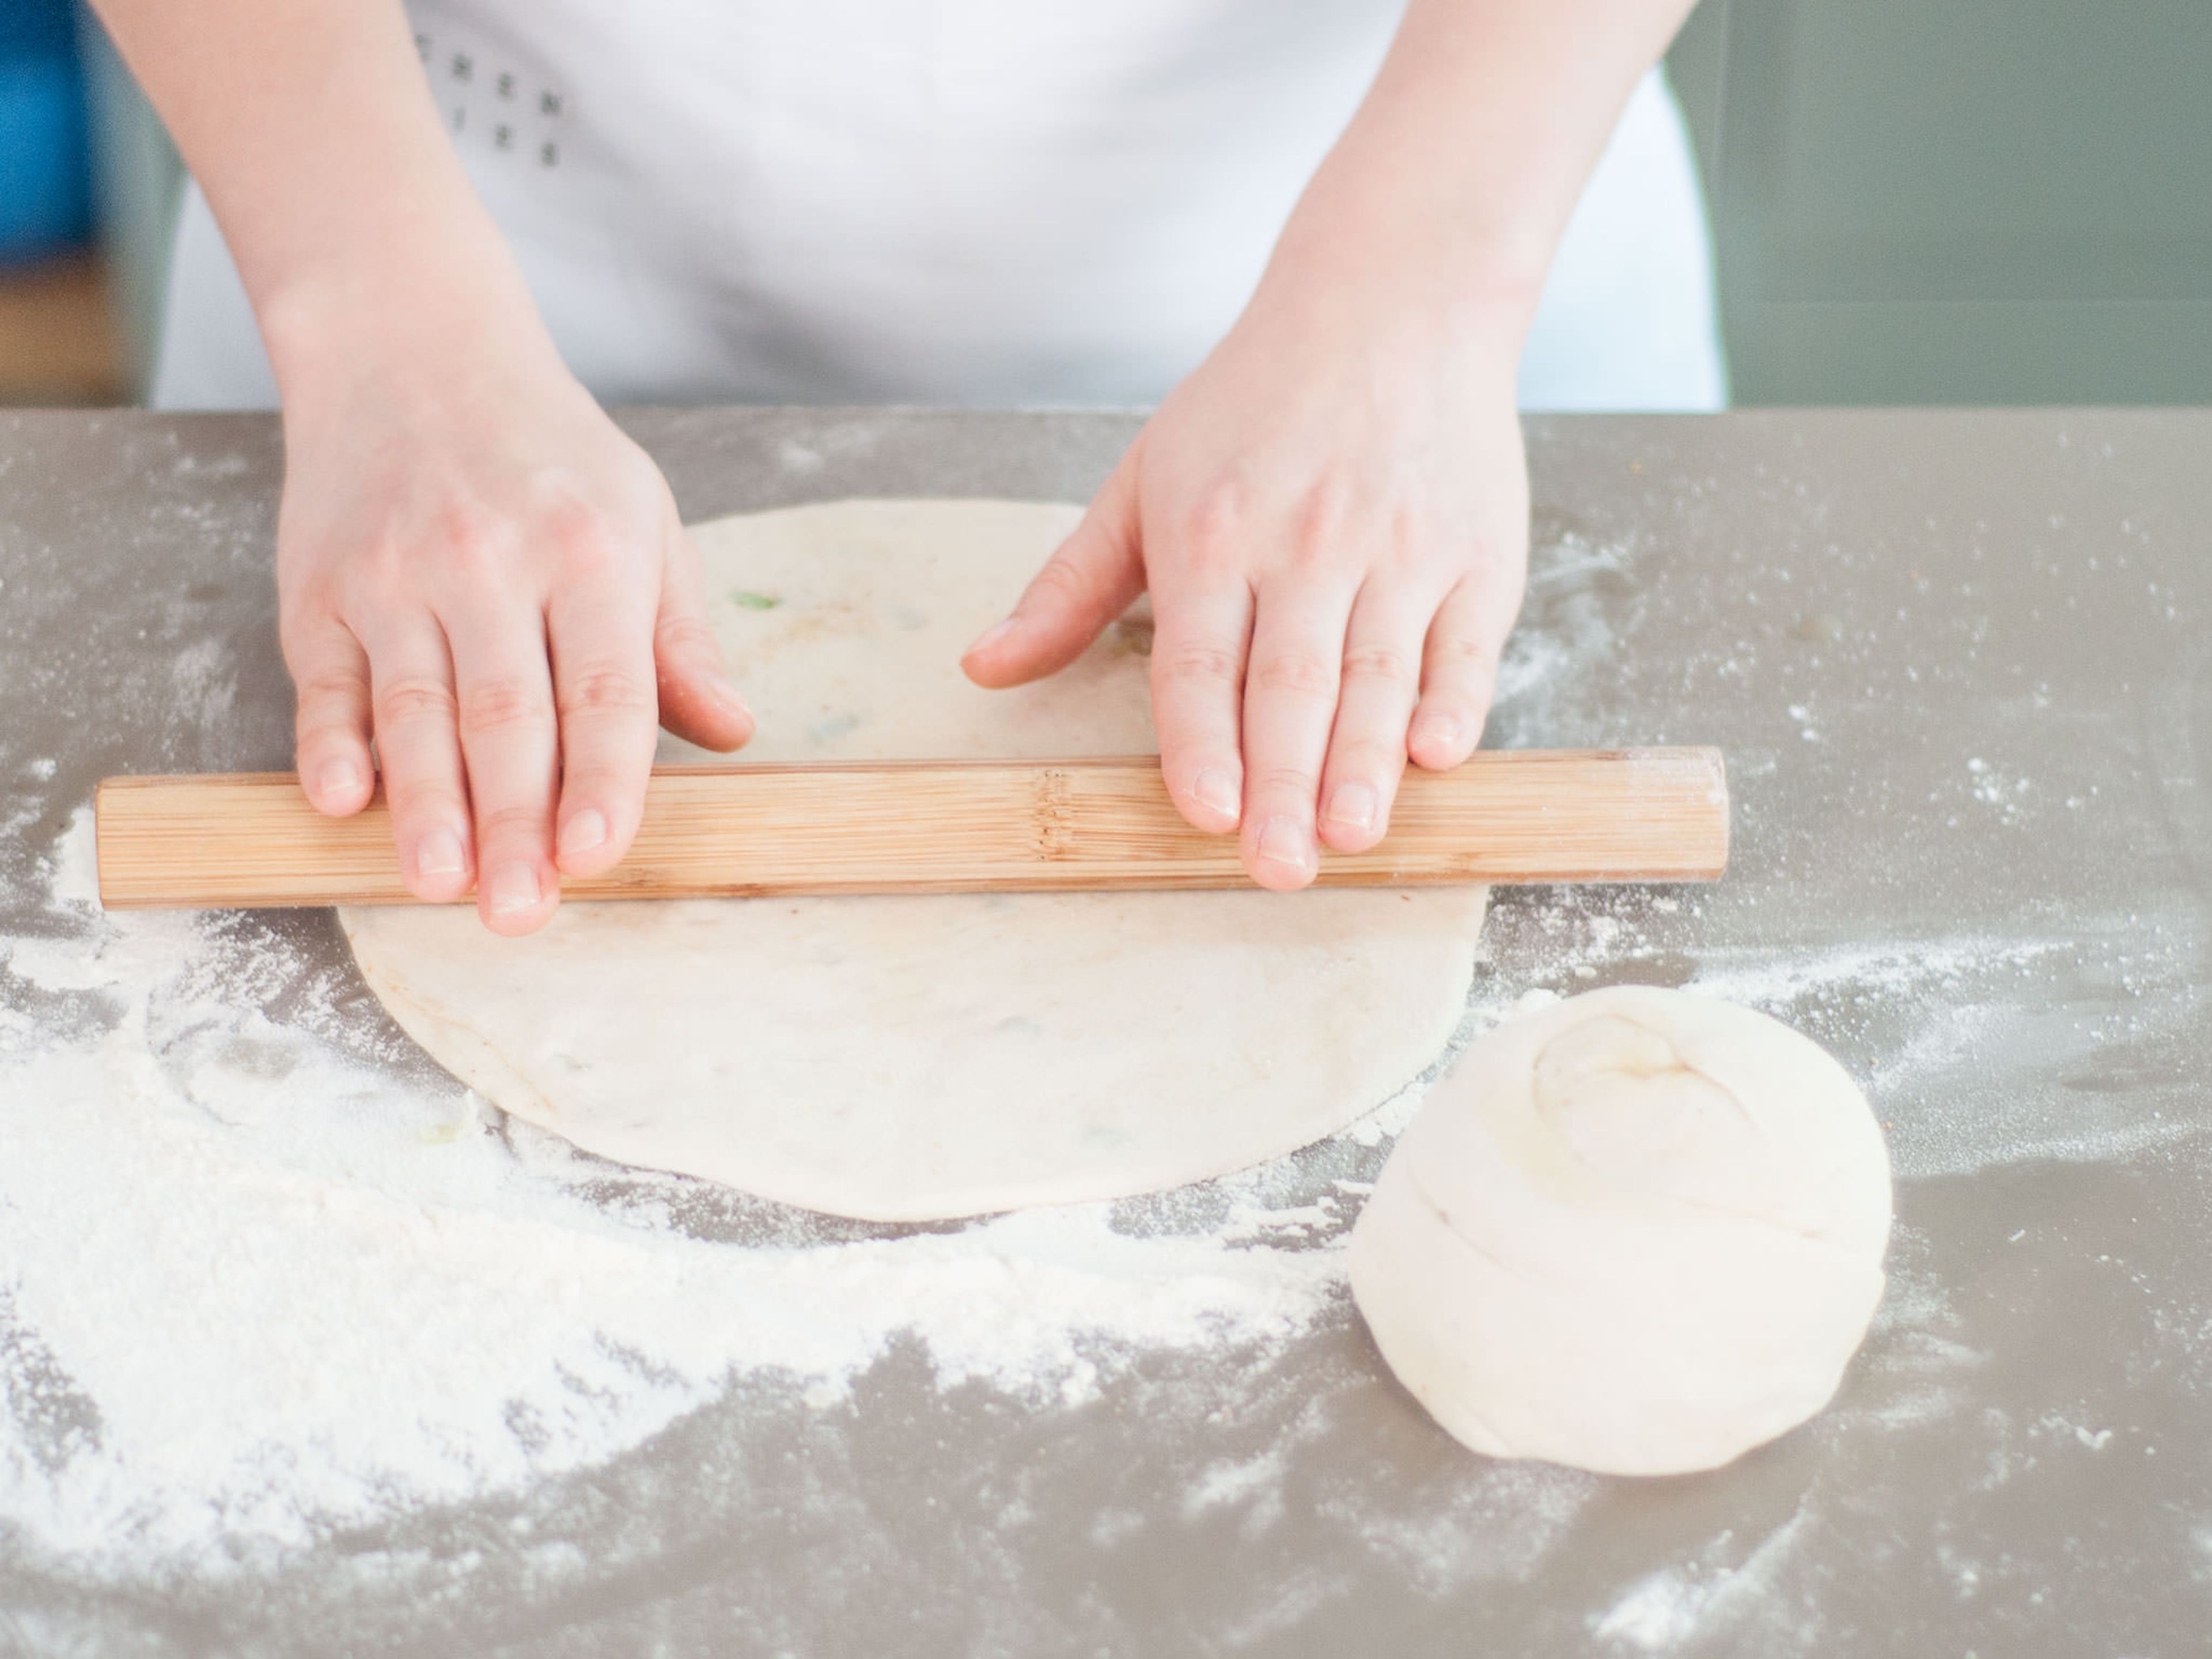 Tightly roll the dough into a ball from one of the short ends; press down with the palm of your hand. Cover with plastic wrap and let rest for approx. 10 – 15 min. Remove plastic wrap and roll into a large, flat pancake, approx. size of the frying pan.